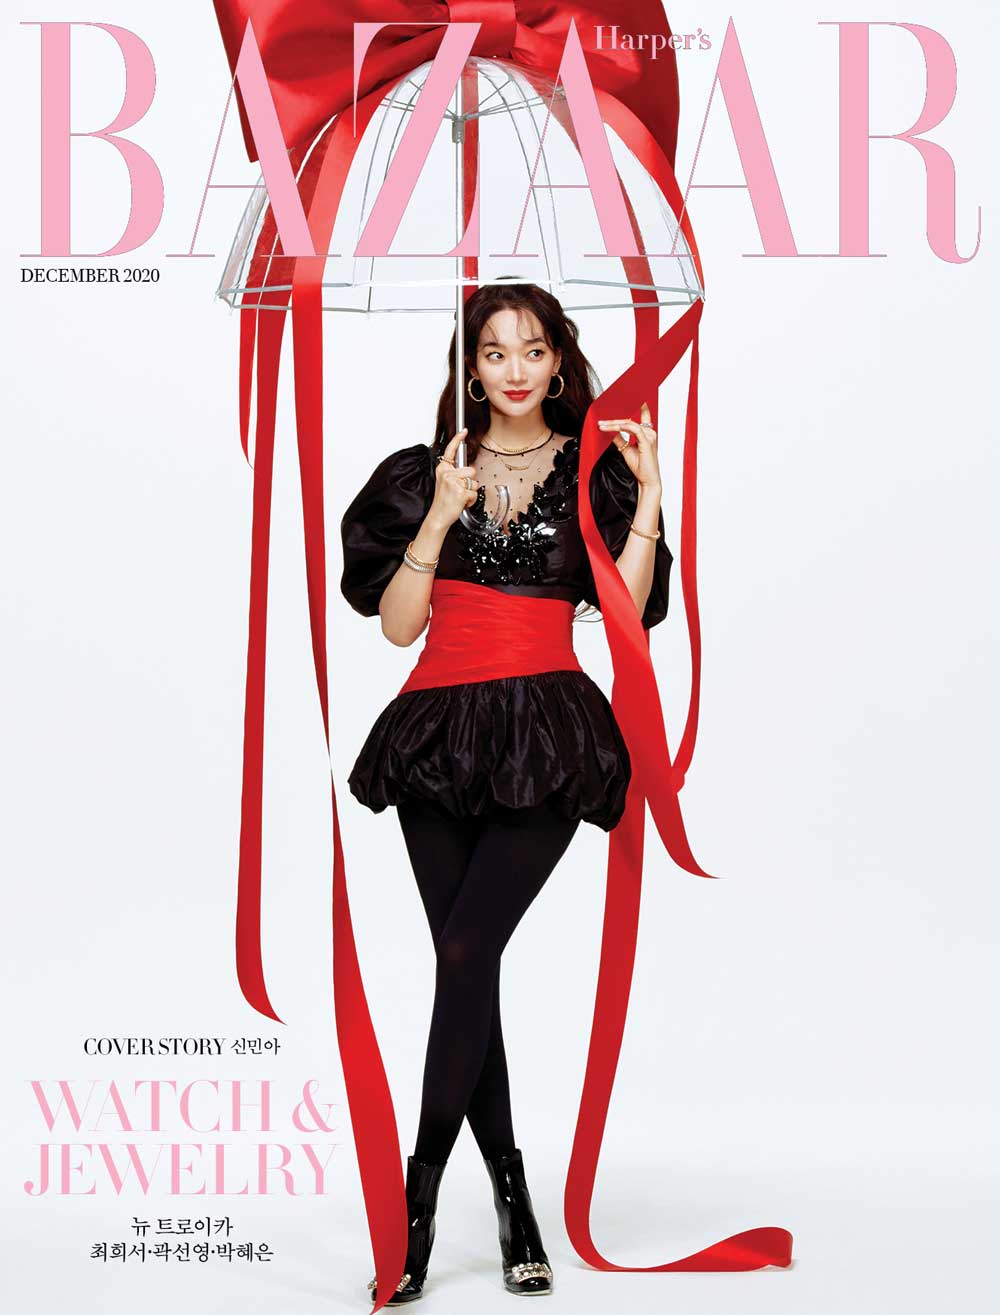 In the fashion magazine Harpers Bazaar, actress Shin Min-as lovely holiday cover and pictorial were released.Shin Min-a presented a fashion photo shoot with TVB Anniversary Awards in the December issue of Harpers Bazaar, a fashion magazine published on the 20th.The unique lovely smile completed the result of being happy just by matching the pictorial concept of Min-a Santa.The scene atmosphere was very warm thanks to Shin Min-a, who did not lose his smile even after shooting until late at night.In an interview after the filming, Shin Min-a said, Everything is hard, but I still have energy because I enjoyed work.It is fun to shoot so long and shoot so much all the time.I am changing every day, I am never the same as yesterday, and the world changes as much as I change every day, so the same result can not come out.So it is always new and fun, he said.When asked about the TVB Anniversary Awards plan with acquaintances, he said, The TVB Anniversary Awards plan has not been set up at all.Movie Diva just opened, and there is one more work to be released in the future. Nowadays, things change from time to time, so I can not plan in advance.If things get better, I hope TVB Anniversary Awards will have a place to eat with family and friends. I dont need to do anything special.He also added a story about the upcoming Movie Leave, a fantasy human drama about the story of a dead mother coming to her daughters side for three days.Ive seen a lot of stories about my daughter and my mother, but I think I want to keep seeing them.Im not sure why Movies feelings are so sad that it feels so sad, so its a movie that everyone can relate to.As for the testimony of finishing this year, It seems to have been the same suffering given to everyone, and I lived in a small way looking for the streets that can heal in it.If I asked her how she was doing in the past, I thought Id do something this year, so I asked her how she was doing.It seems to have been a year to think about the people close to them and take care of them. Meanwhile, interviews with the pictorial with Shin Min-a can be found in the December issue of Harpers Bazaar, website and Instagram.Photo = Harpers Bazaar Korea